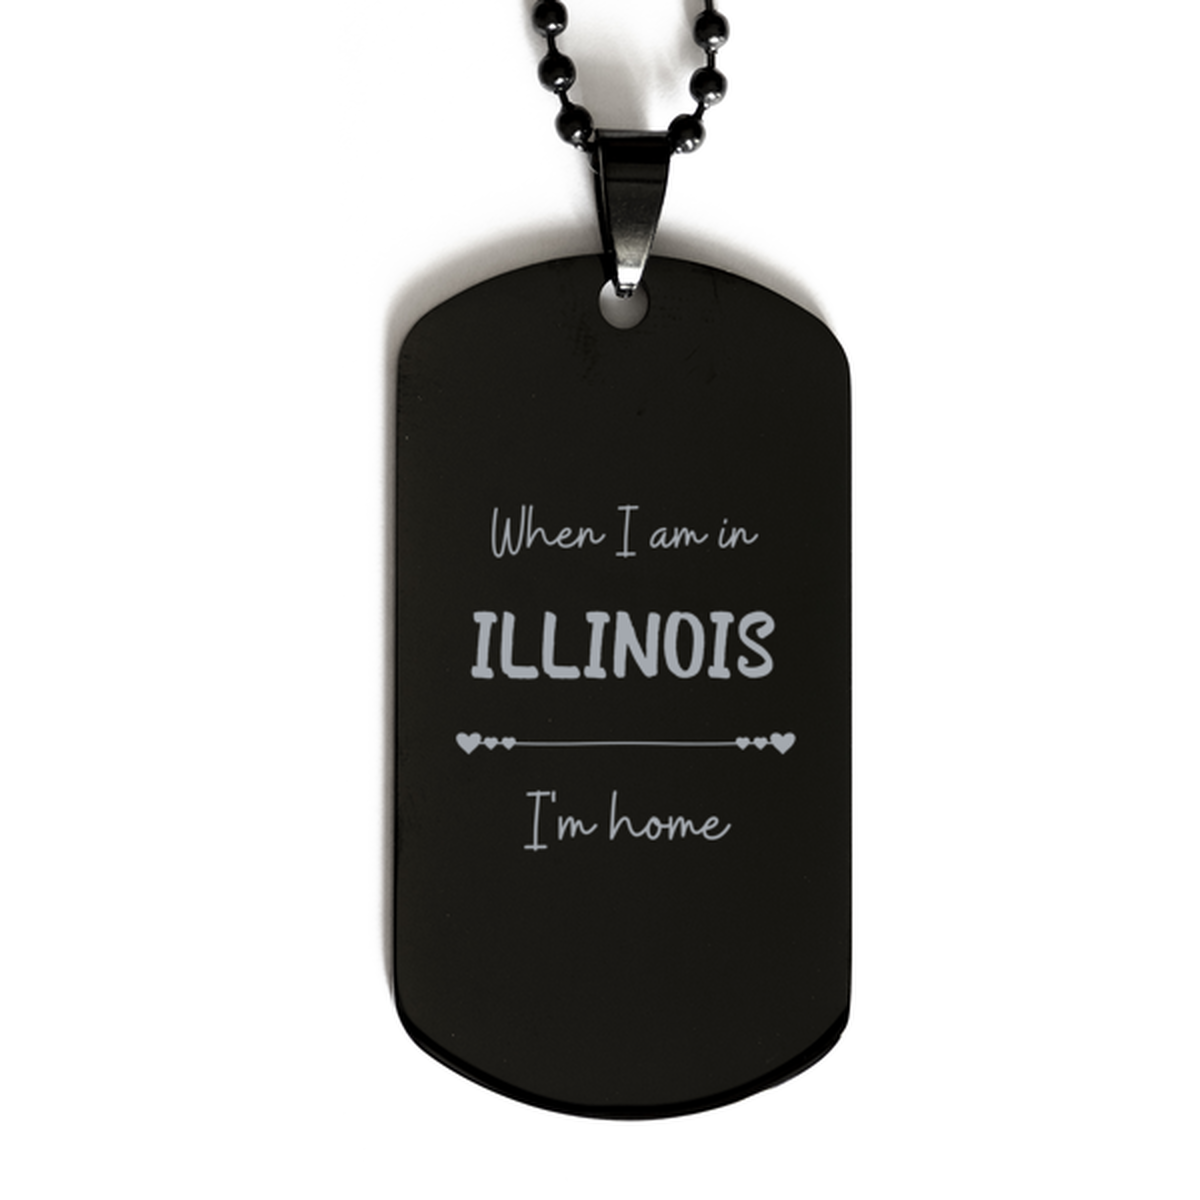 When I am in Illinois I'm home Black Dog Tag, Cheap Gifts For Illinois, State Illinois Birthday Gifts for Friends Coworker